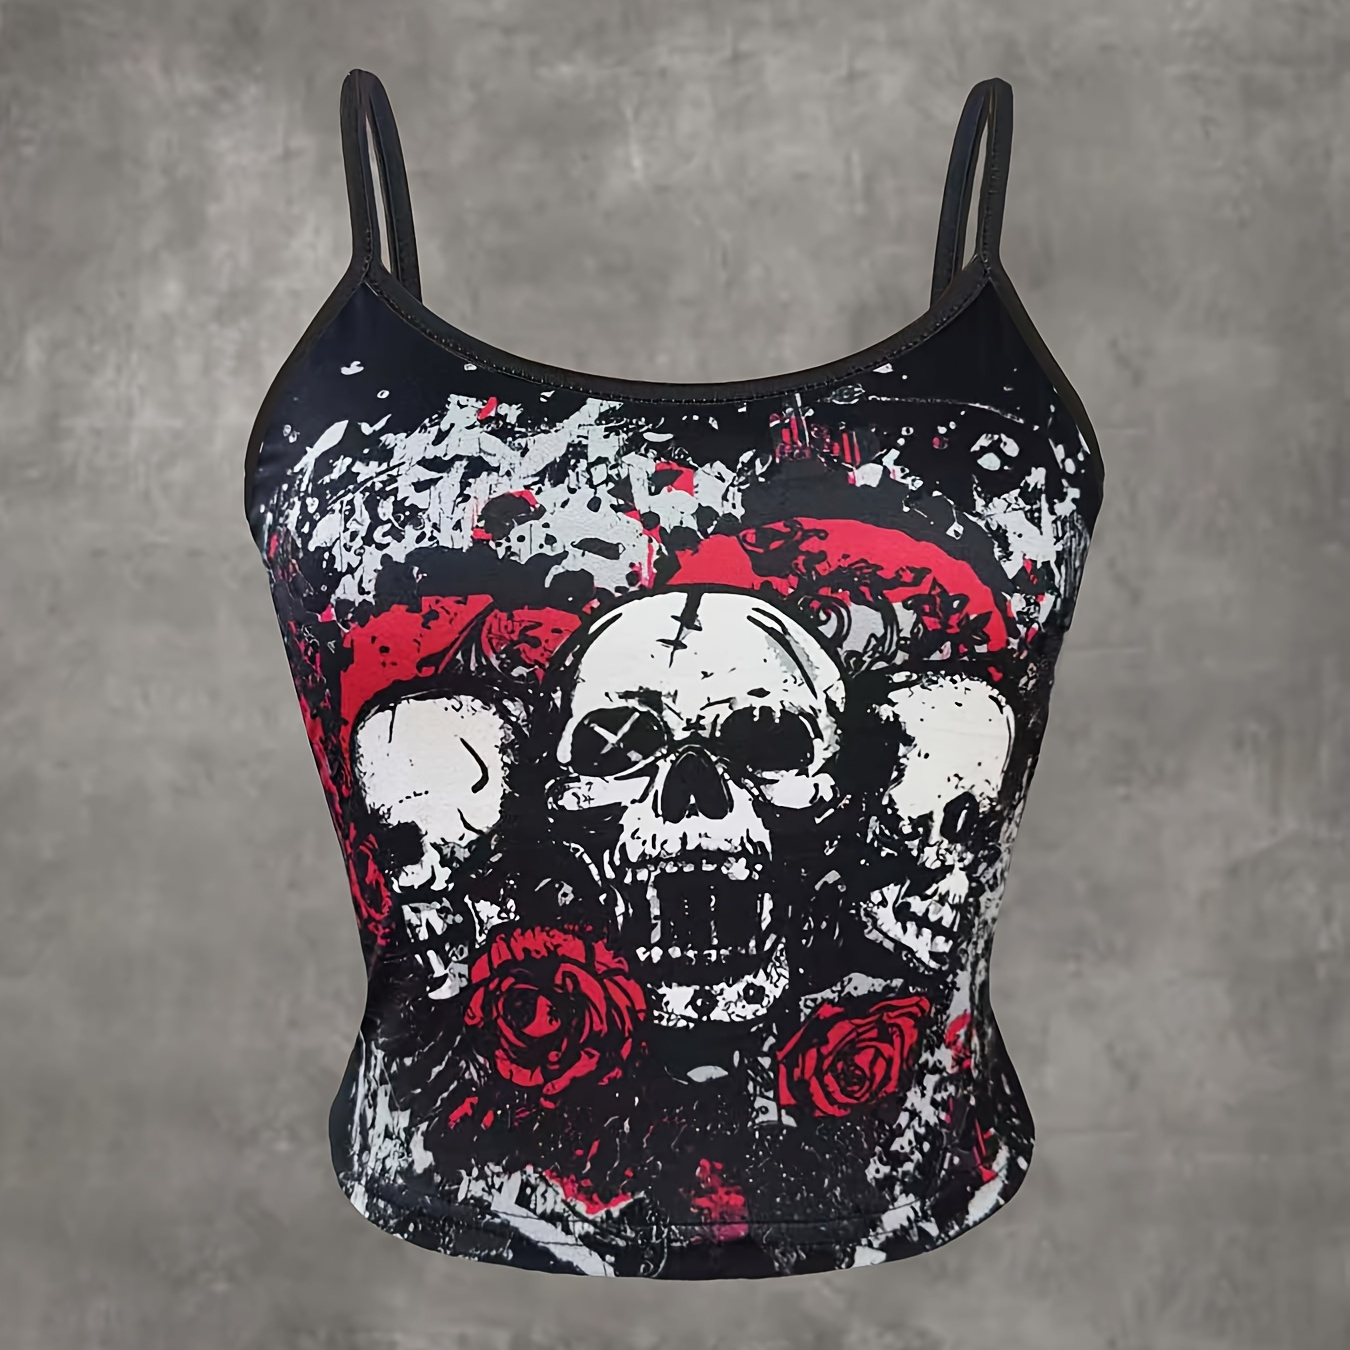 

Skull & Rose Print Cami Top, Casual Sleeveless Crop Top For Summer, Women's Clothing For Y2k/grunge Style